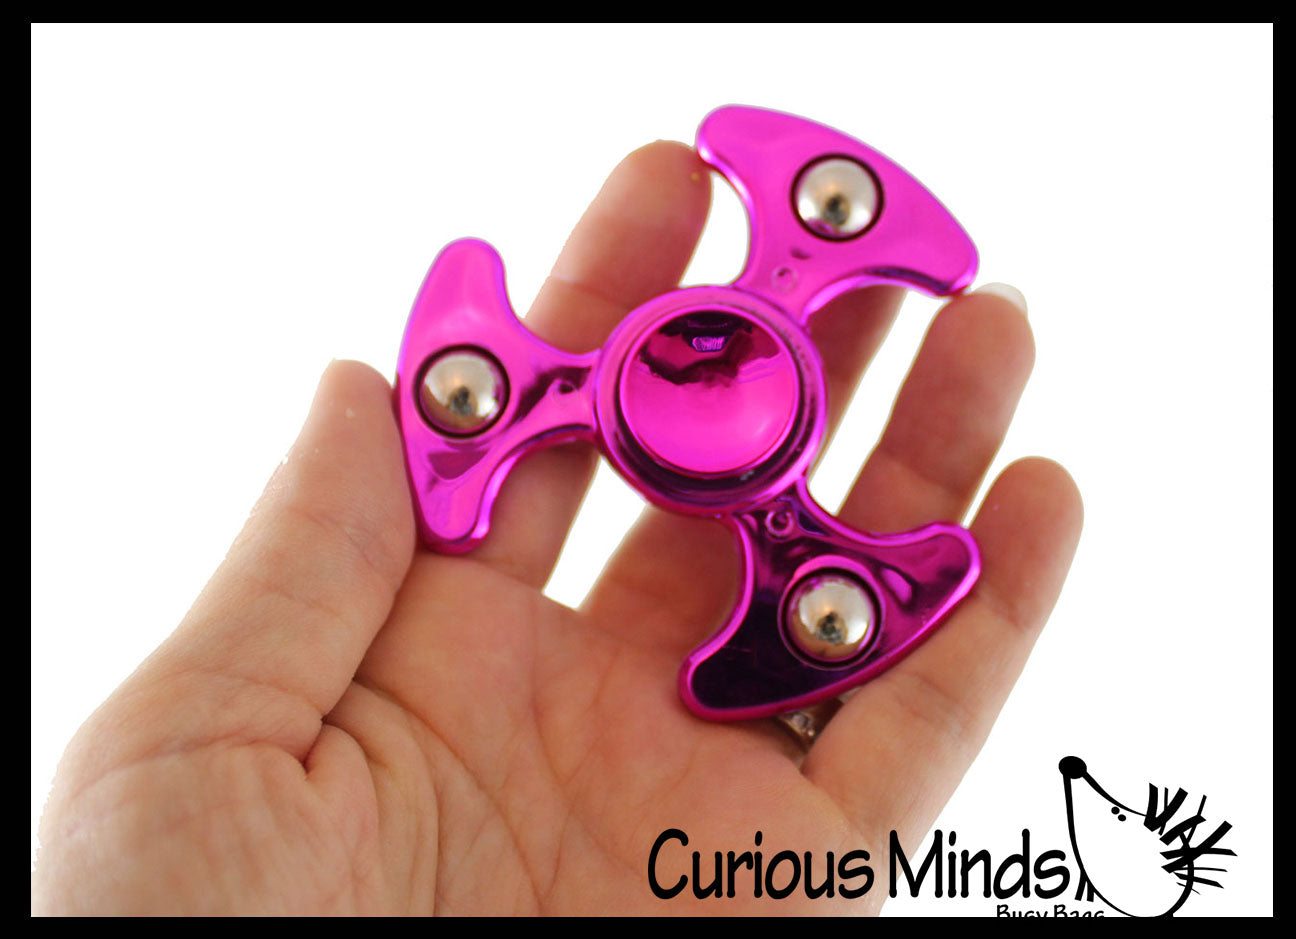 Køb honning Topmøde UFO Metallic Fidget Spinner Toy - Spinning Hand Fidget - Anxiety ADHD |  Curious Minds Busy Bags